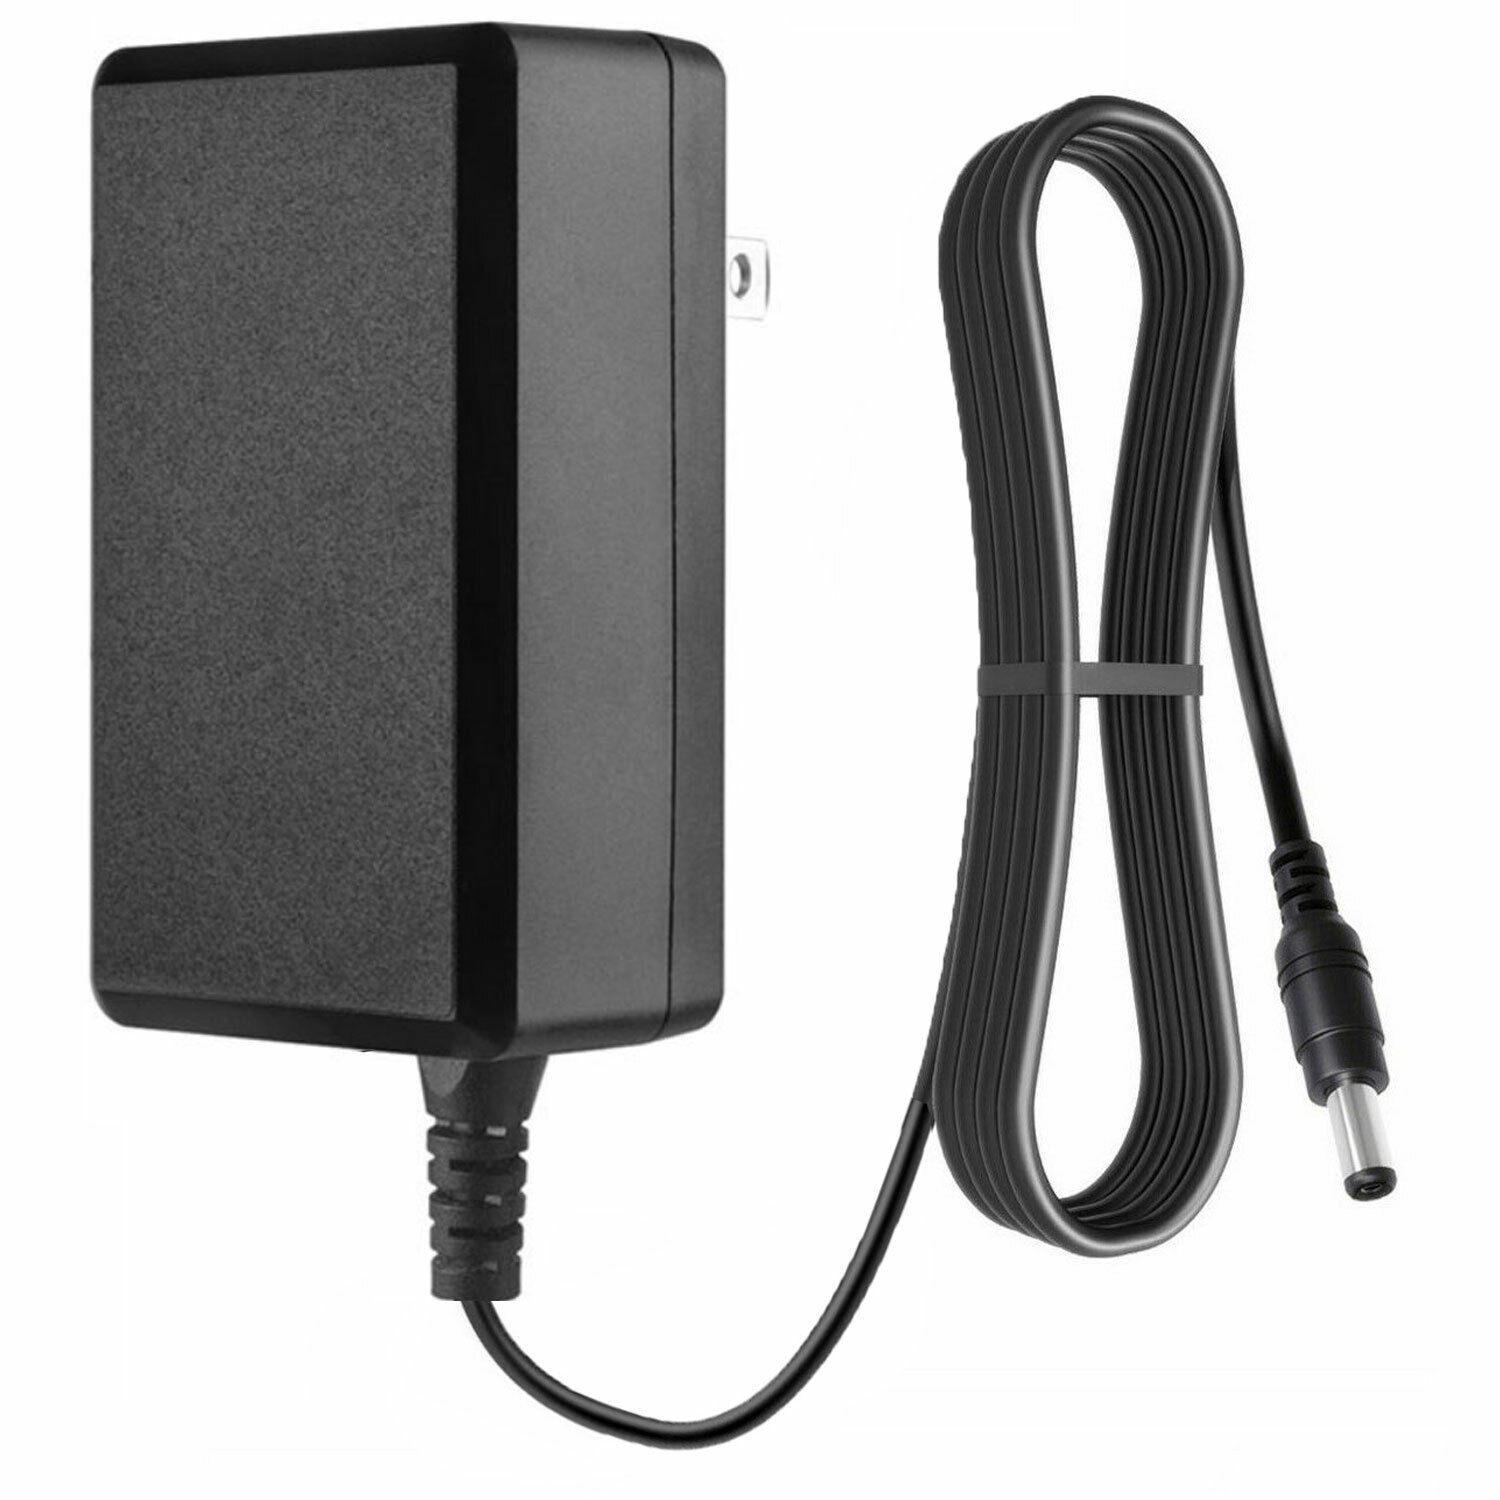 9V 1A AC Adapter Charger for Keyboard CTK-551 CTK551 Power Supply Cord Technical Specifications: Construction: 100% Bra